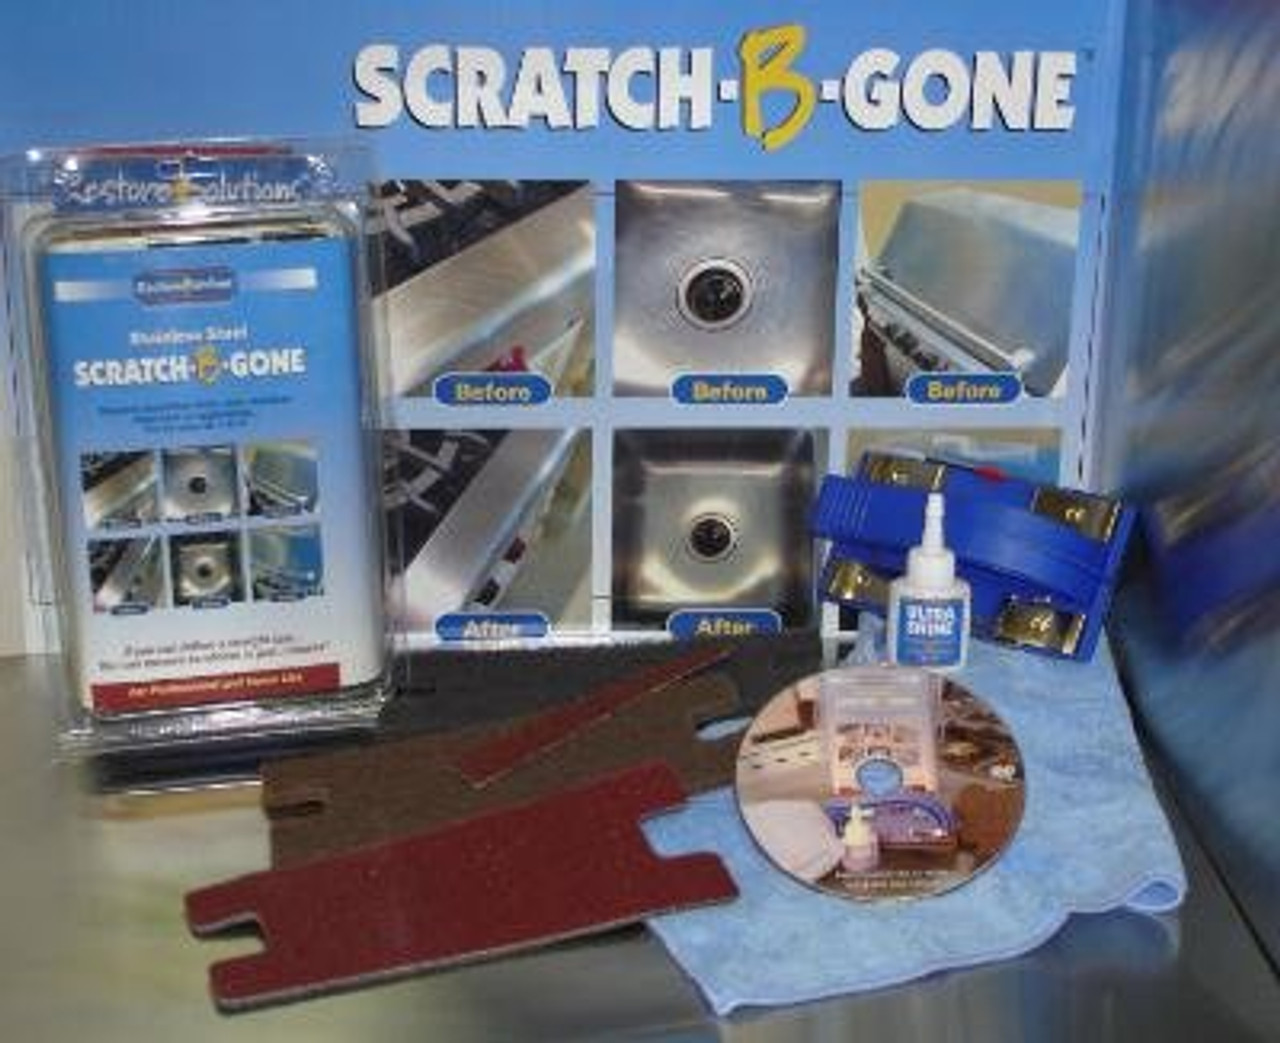 Stainless Steel Scratch-B-Gone Homeowners Kit - Repair Products